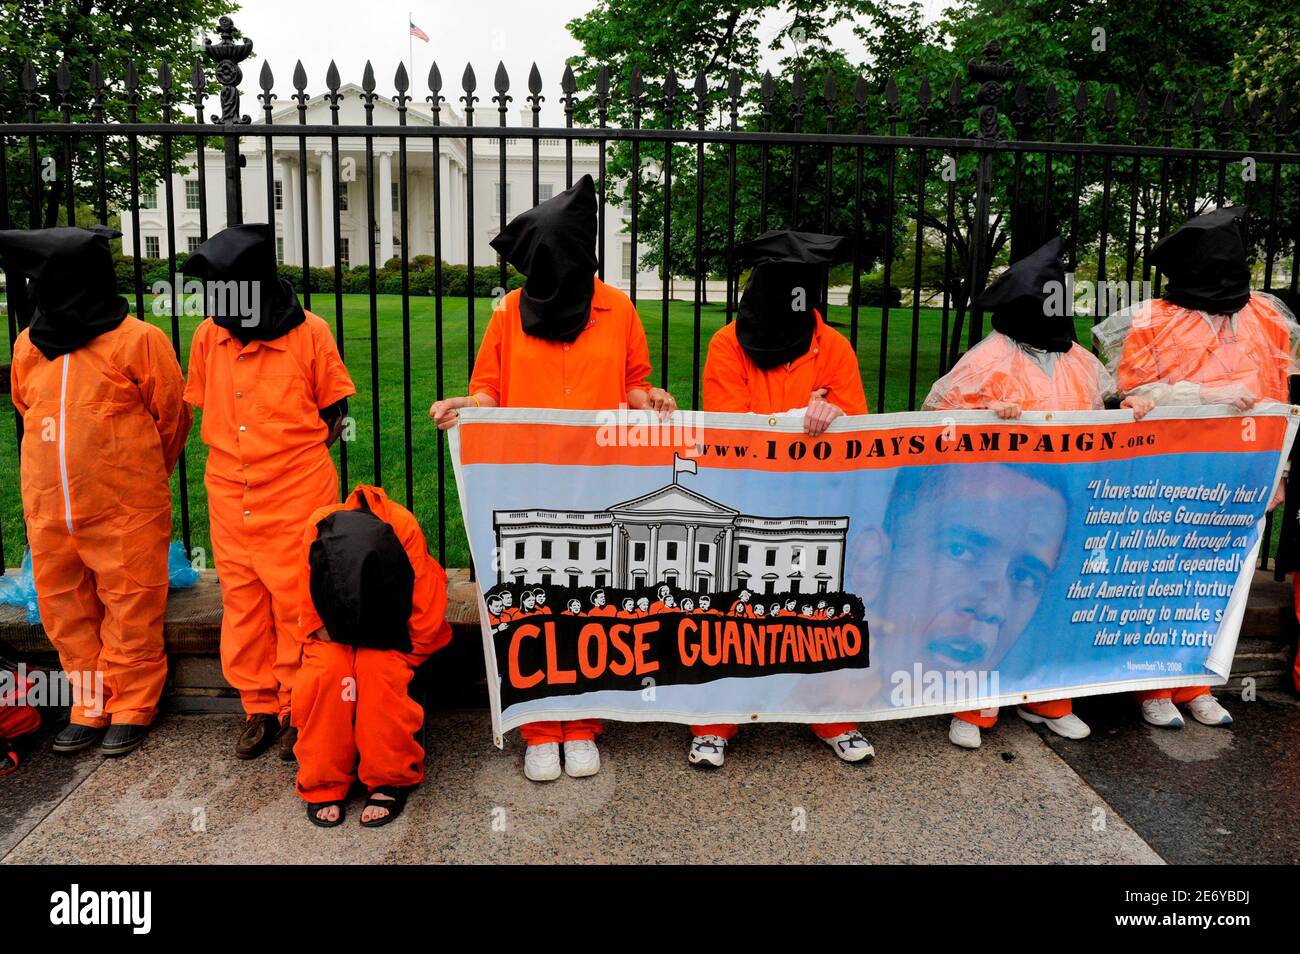 Demonstrators in orange jail jumpsuits and black hoods hold a vigil outside the White House to mark the 100th day of President Barack Obama's administration and his promise to close the military prison facility in Guantanamo Bay, Cuba, in Washington, April 29, 2009.      REUTERS/Mike Theiler   (UNITED STATES CONFLICT POLITICS) Stock Photo